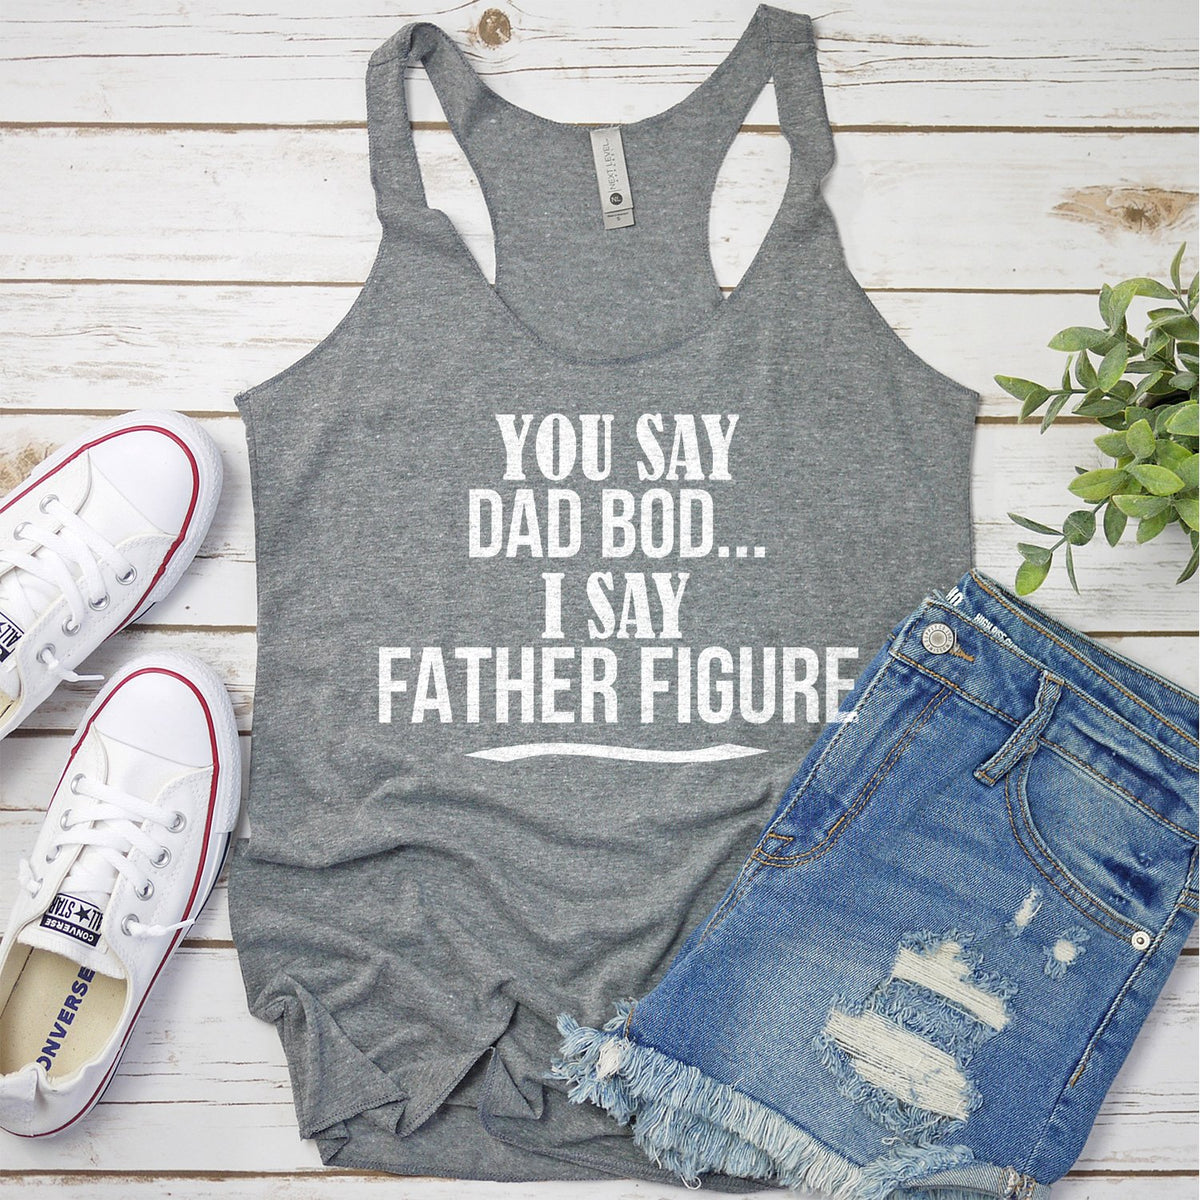 You Say Dad Bod I Say Father Figure - Tank Top Racerback